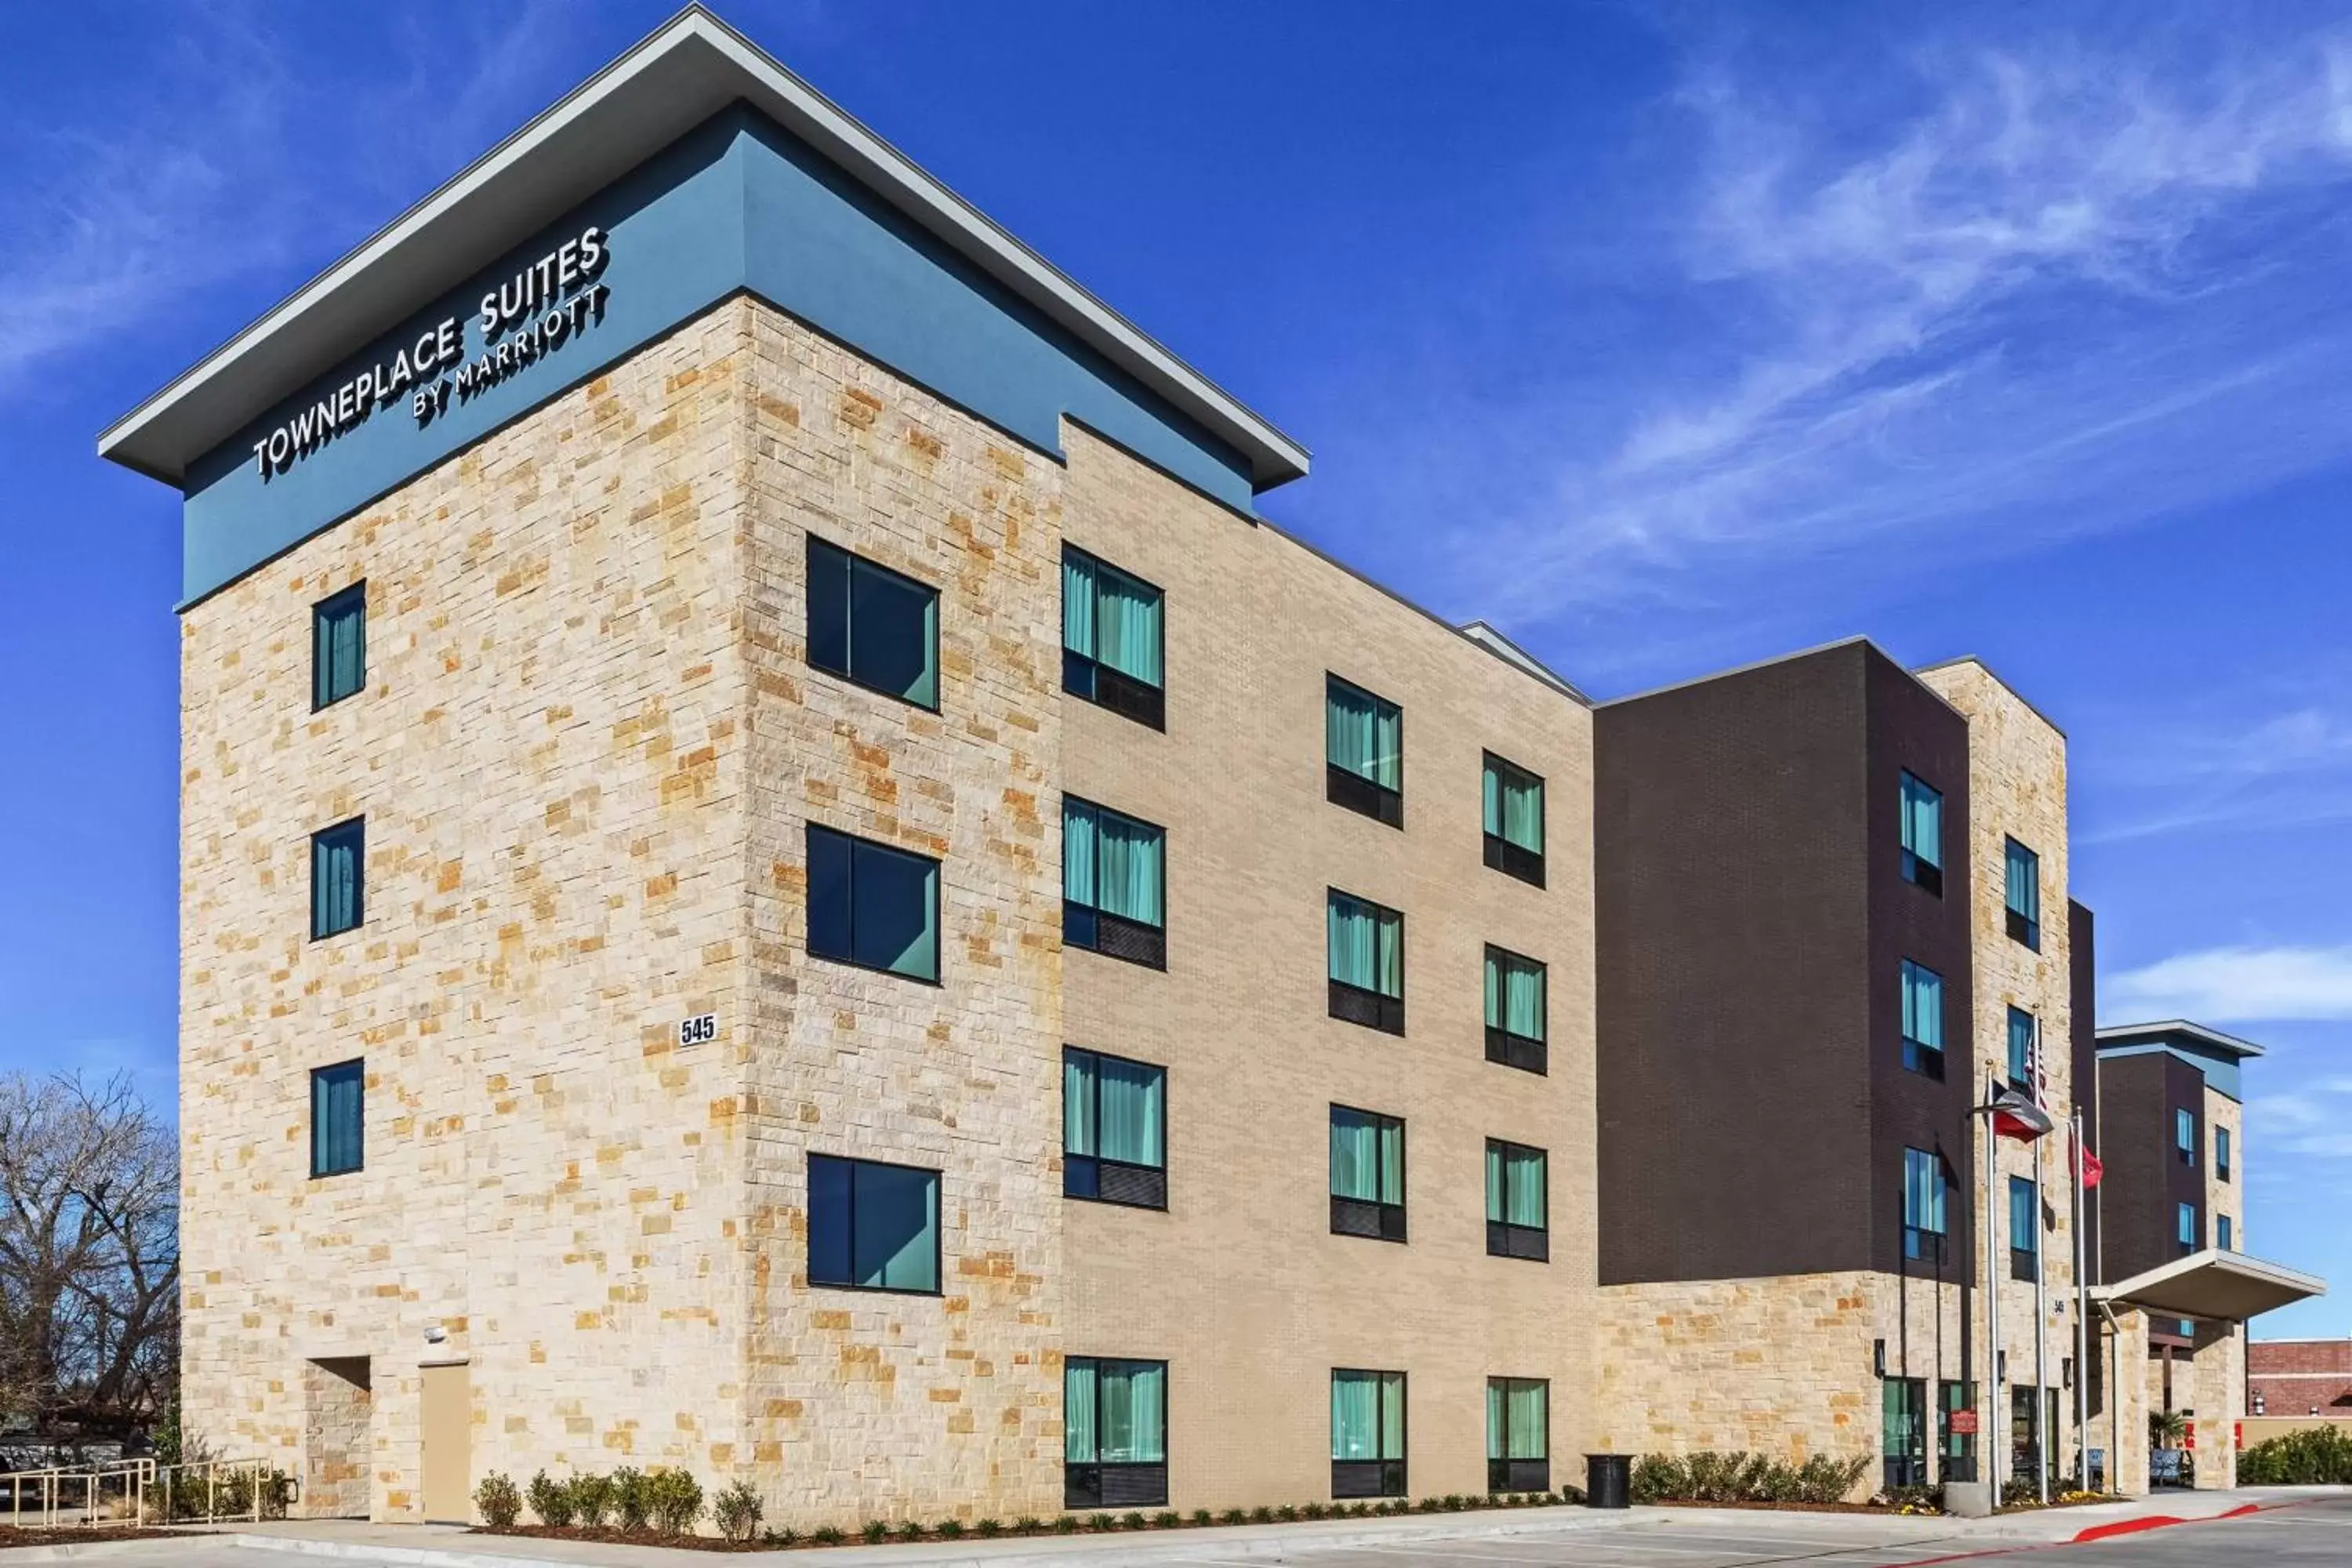 Property Building in TownePlace Suites Dallas Plano/Richardson